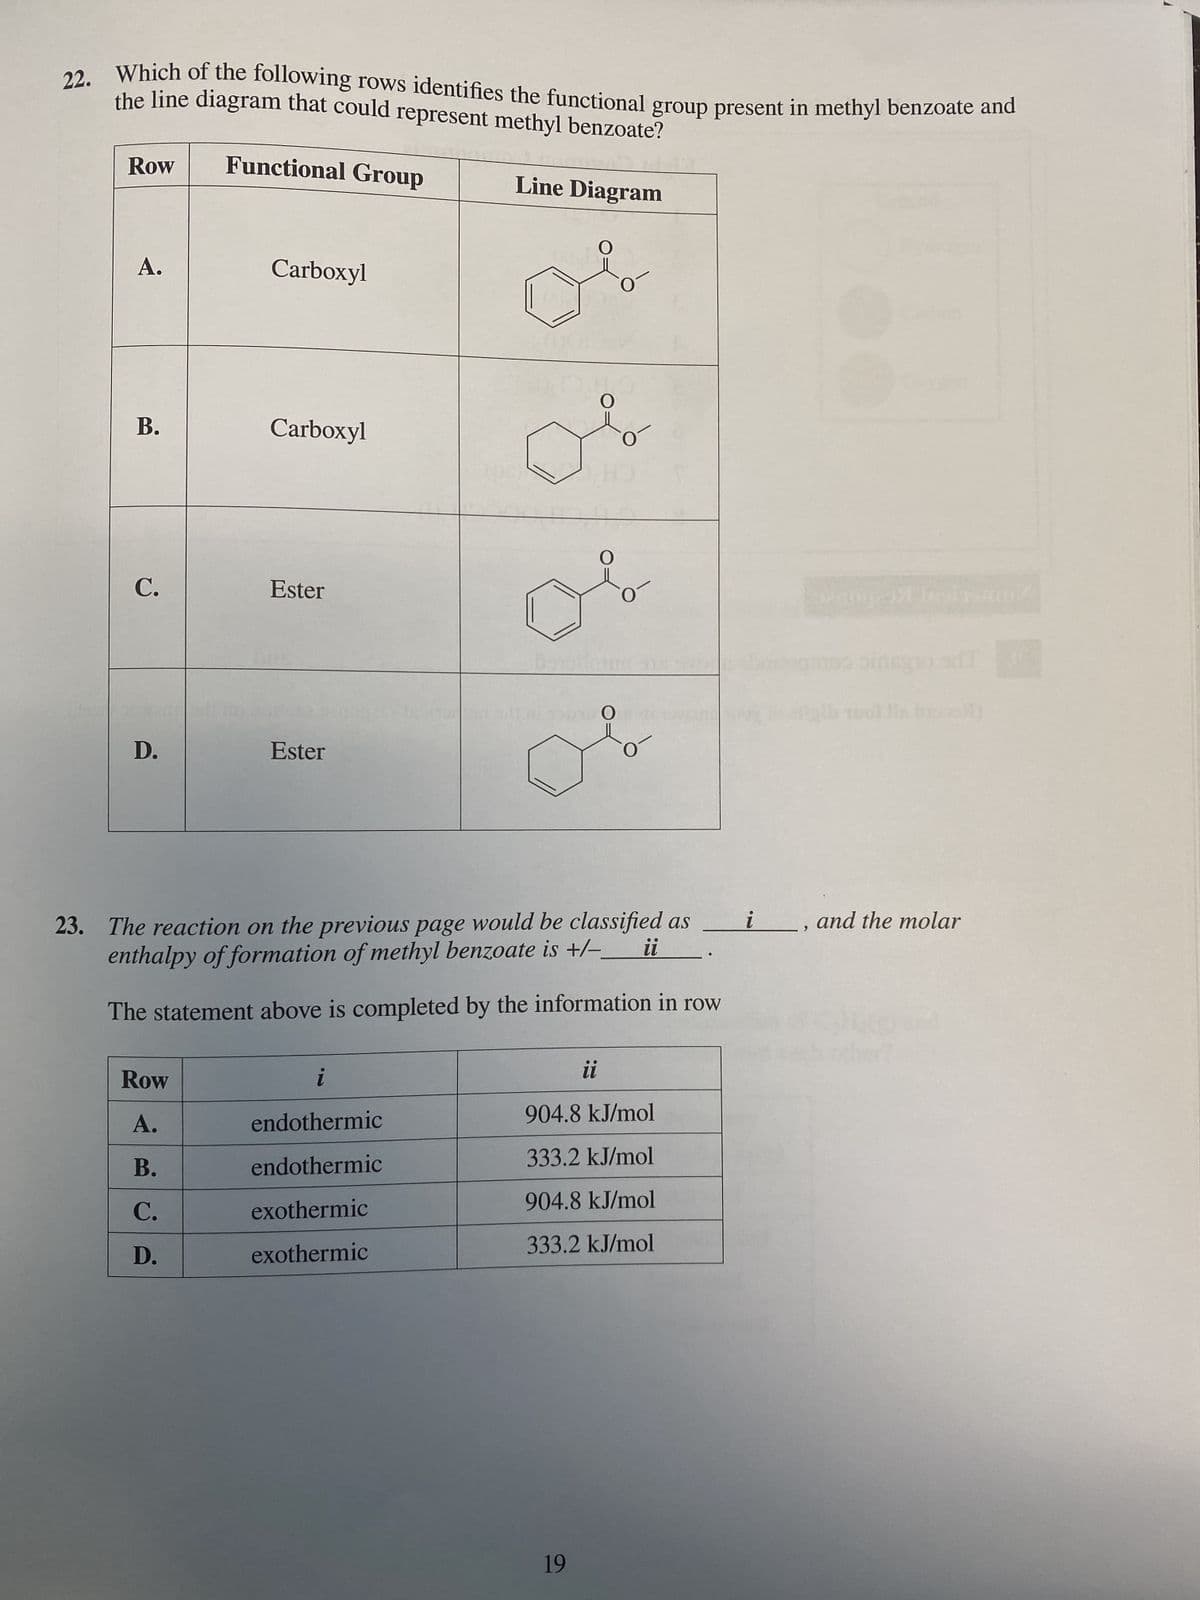 22. Which of the following rows identifies the functional group present in methyl benzoate and
the line diagram that could represent methyl benzoate?
Functional Group
Line Diagram
Row
A.
B.
C.
D.
Carboxyl
Row
A.
B.
C.
D.
Carboxyl
Ester
Ester
i
endothermic
endothermic
exothermic
exothermic
O
O
ul
19
O
150160
O
23. The reaction on the previous page would be classified as
enthalpy of formation of methyl benzoate is +/-
The statement above is completed by the information in row
O
O
●●
Ul
904.8 kJ/mol
333.2 kJ/mol
904.8 kJ/mol
333.2 kJ/mol
i
pismu
noo pinagio onl
1001 His broos/1
and the molar